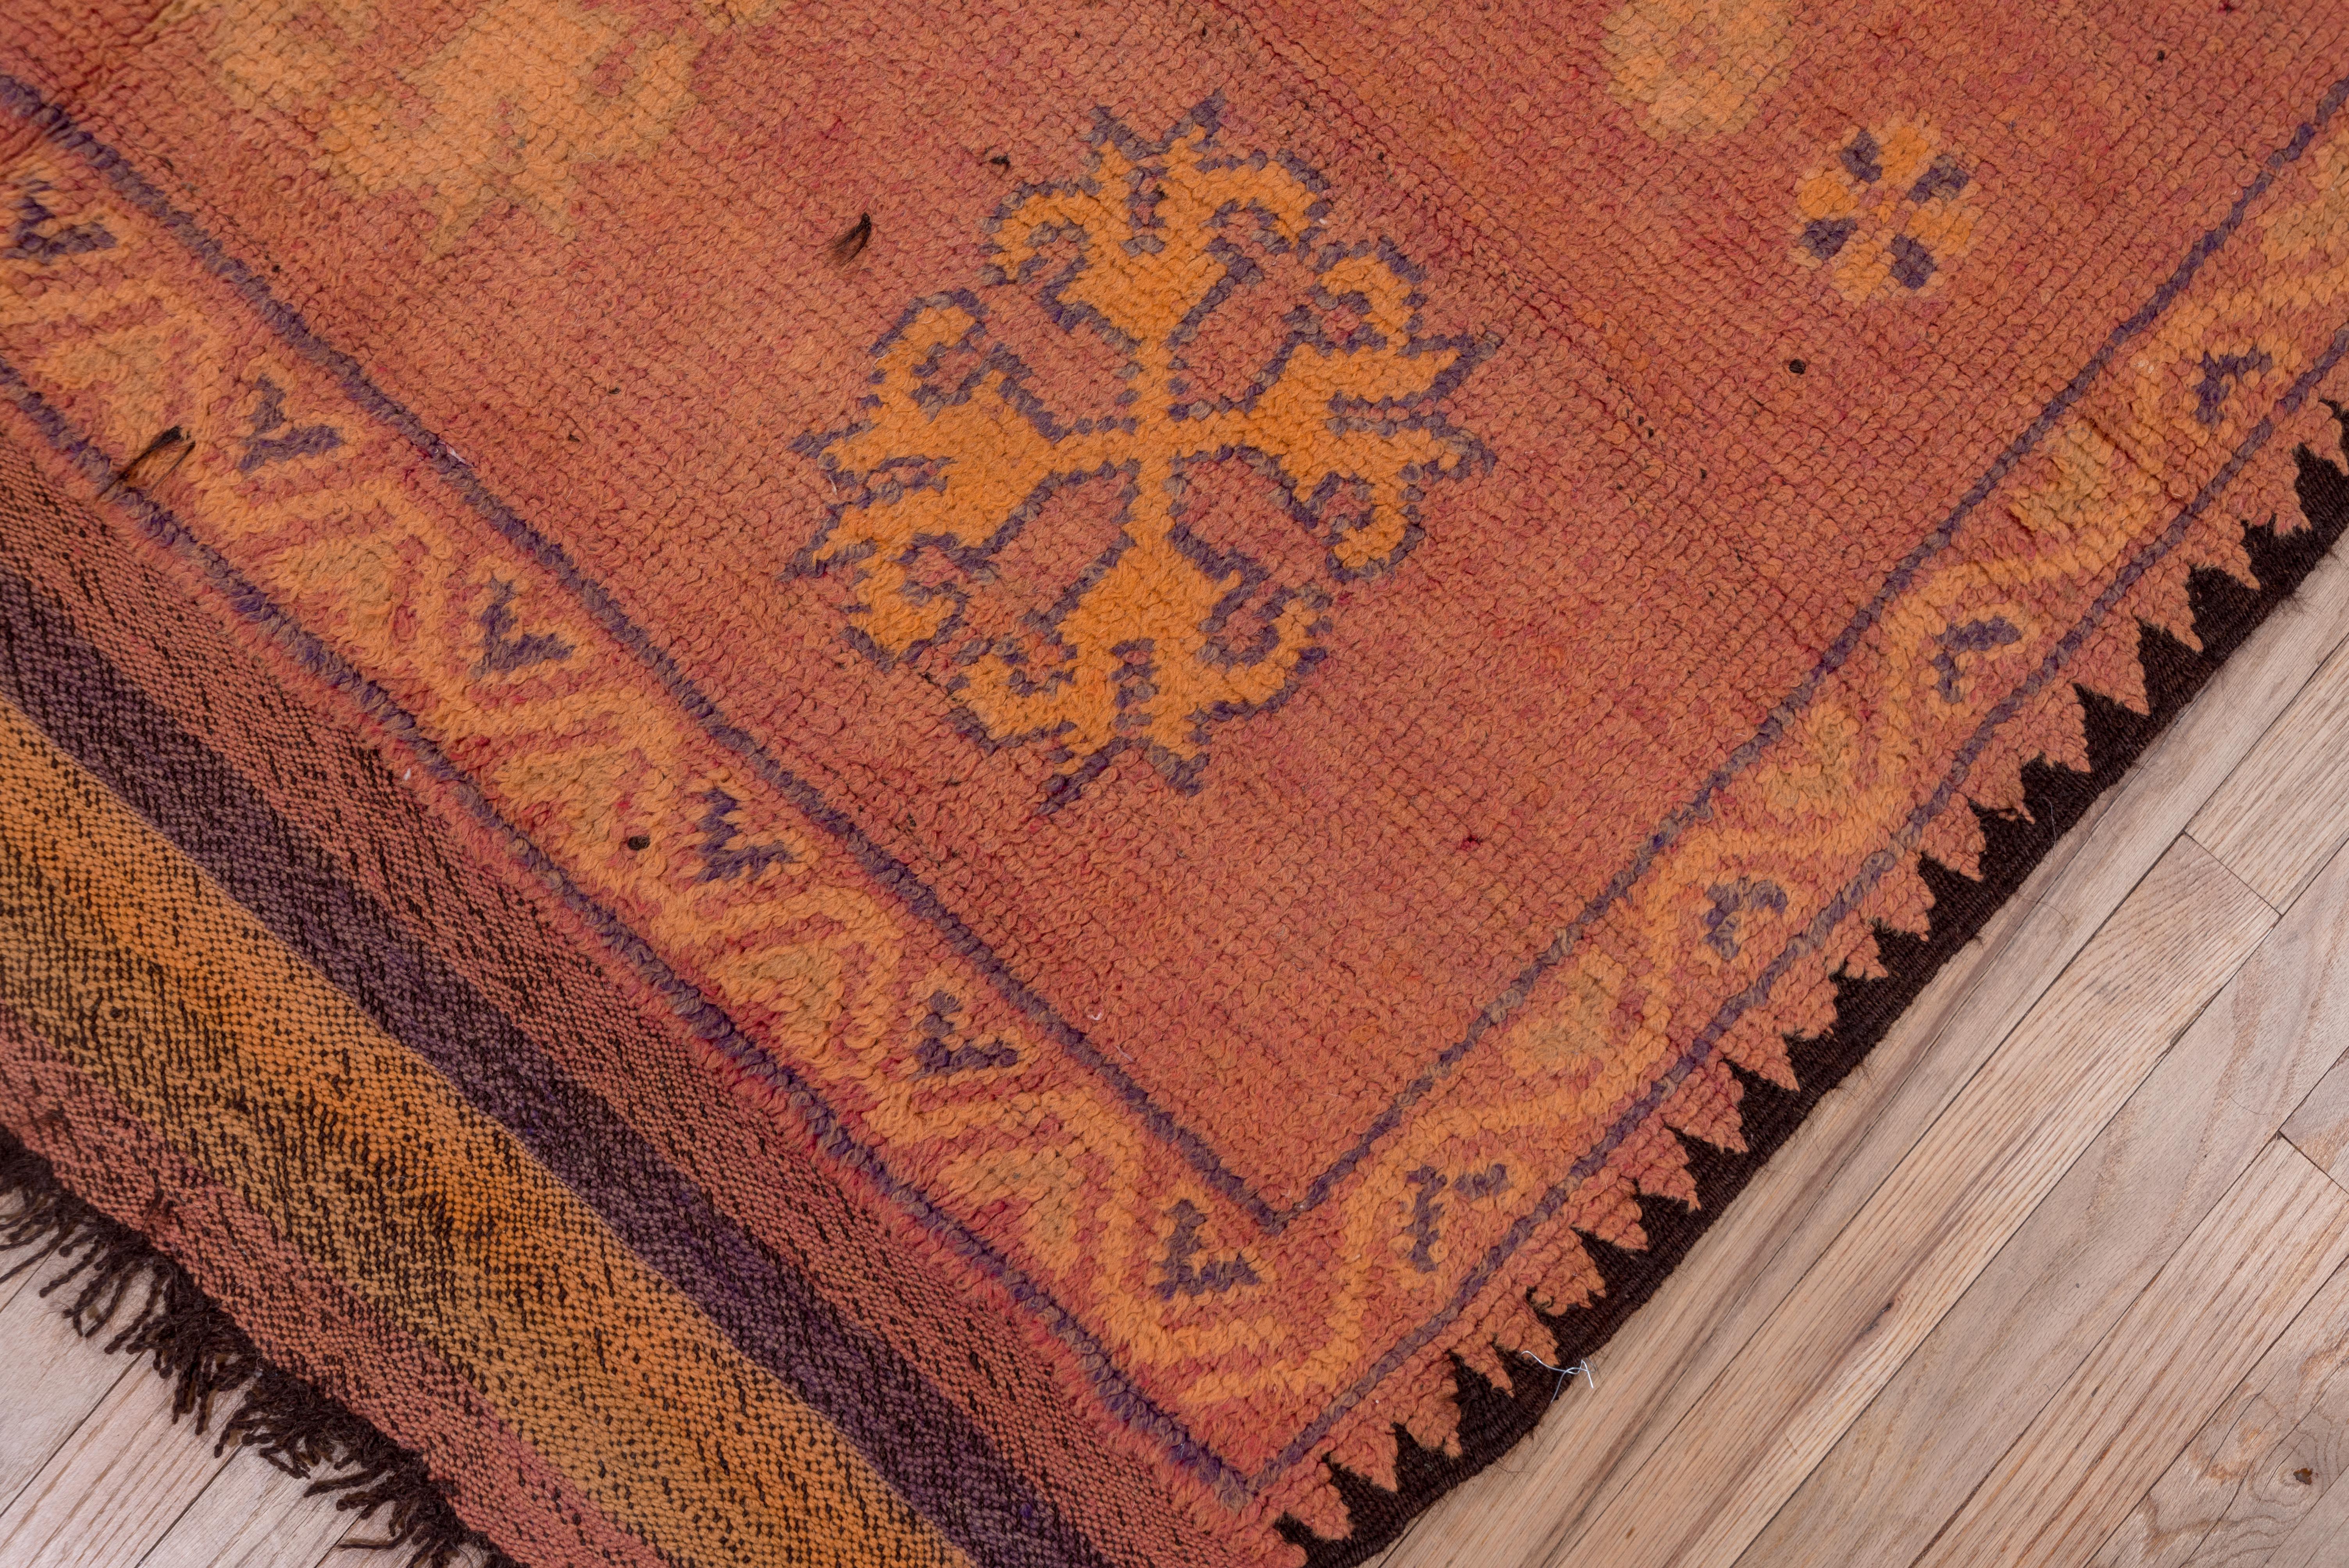 Shades of yellow, brown, orange, red and black make up the border of this exquisite village rug (Morocco) and the center field is filled with hand-knotted designs passed down through generations.